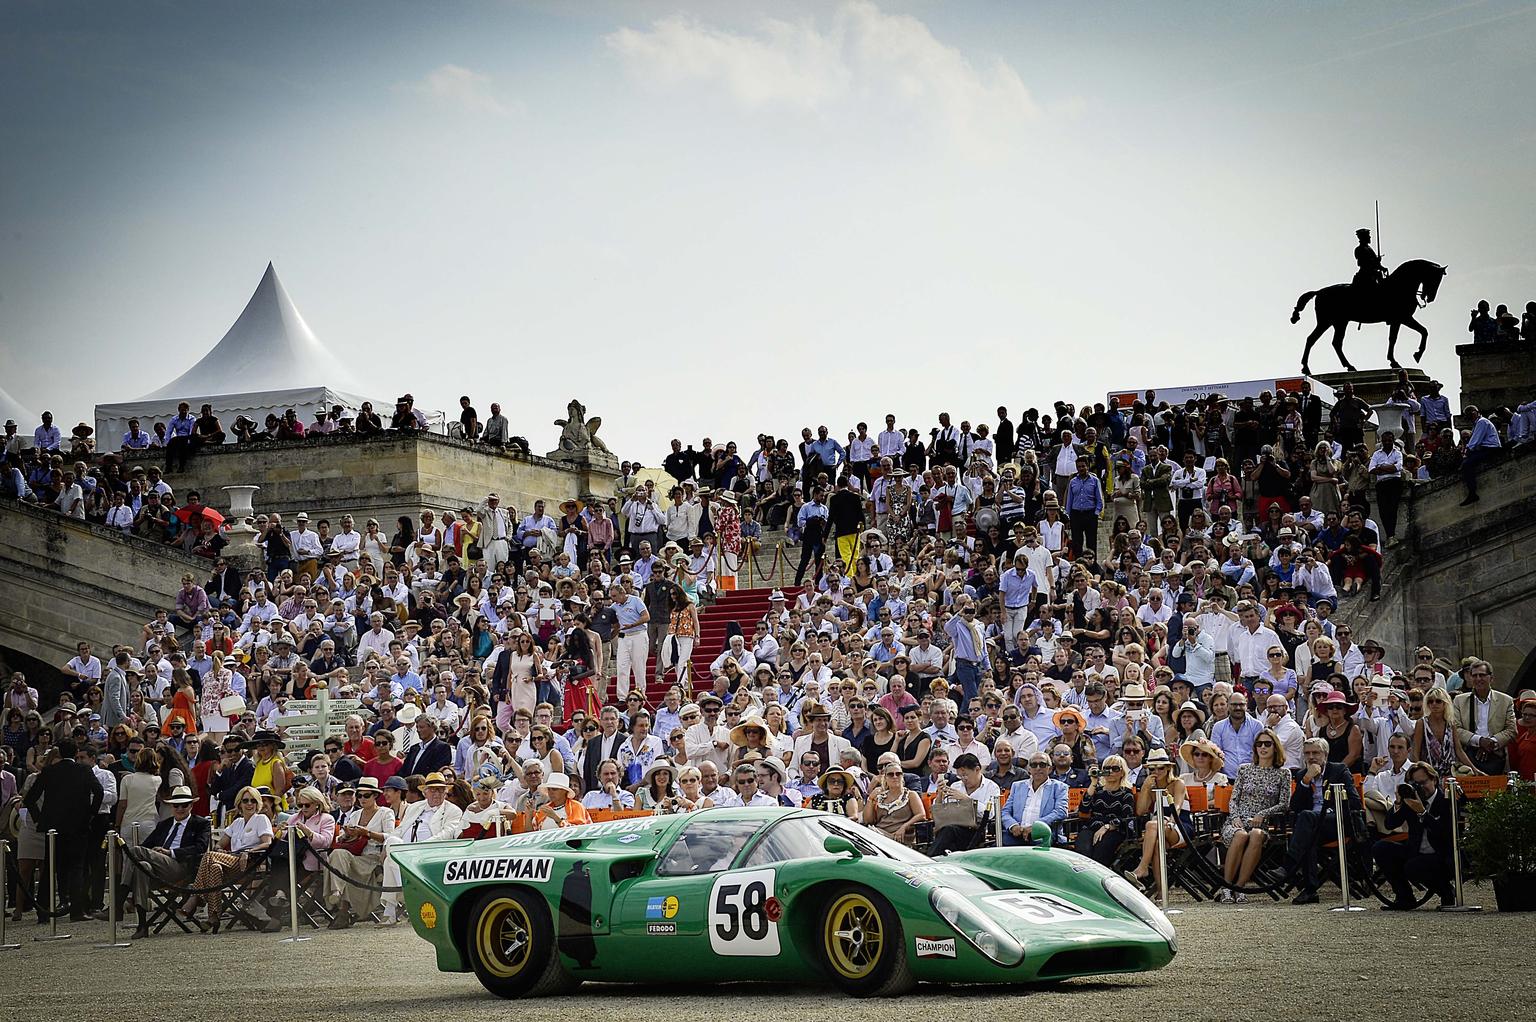 The history of motor cars was displayed during the three different competitions - or concours - held at Chantilly.